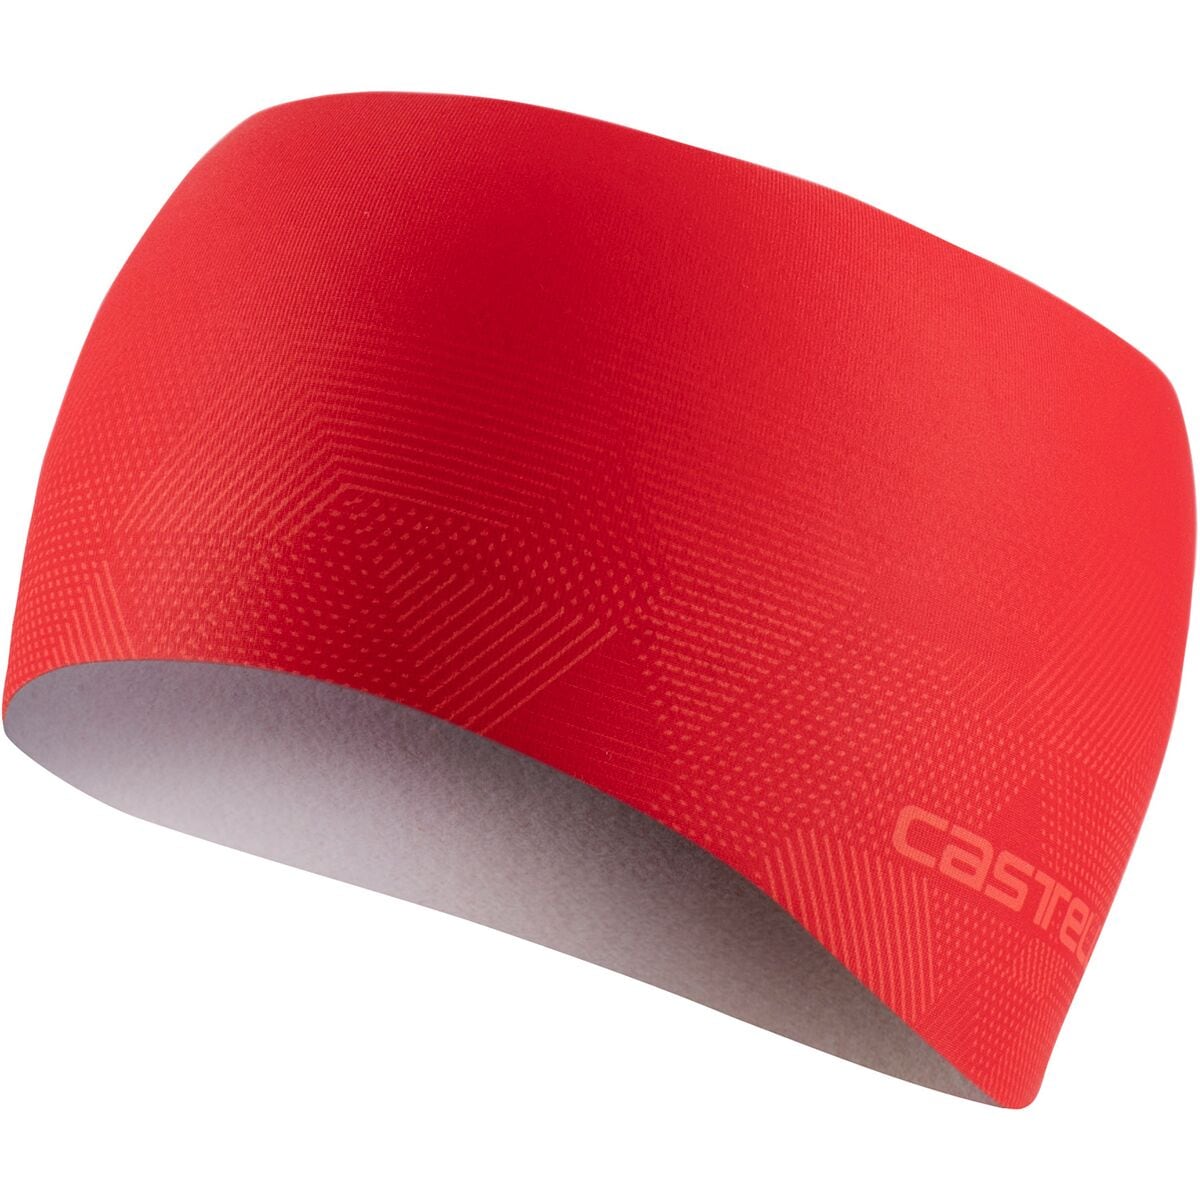 Castelli Pro Thermal Headband Red, One Size